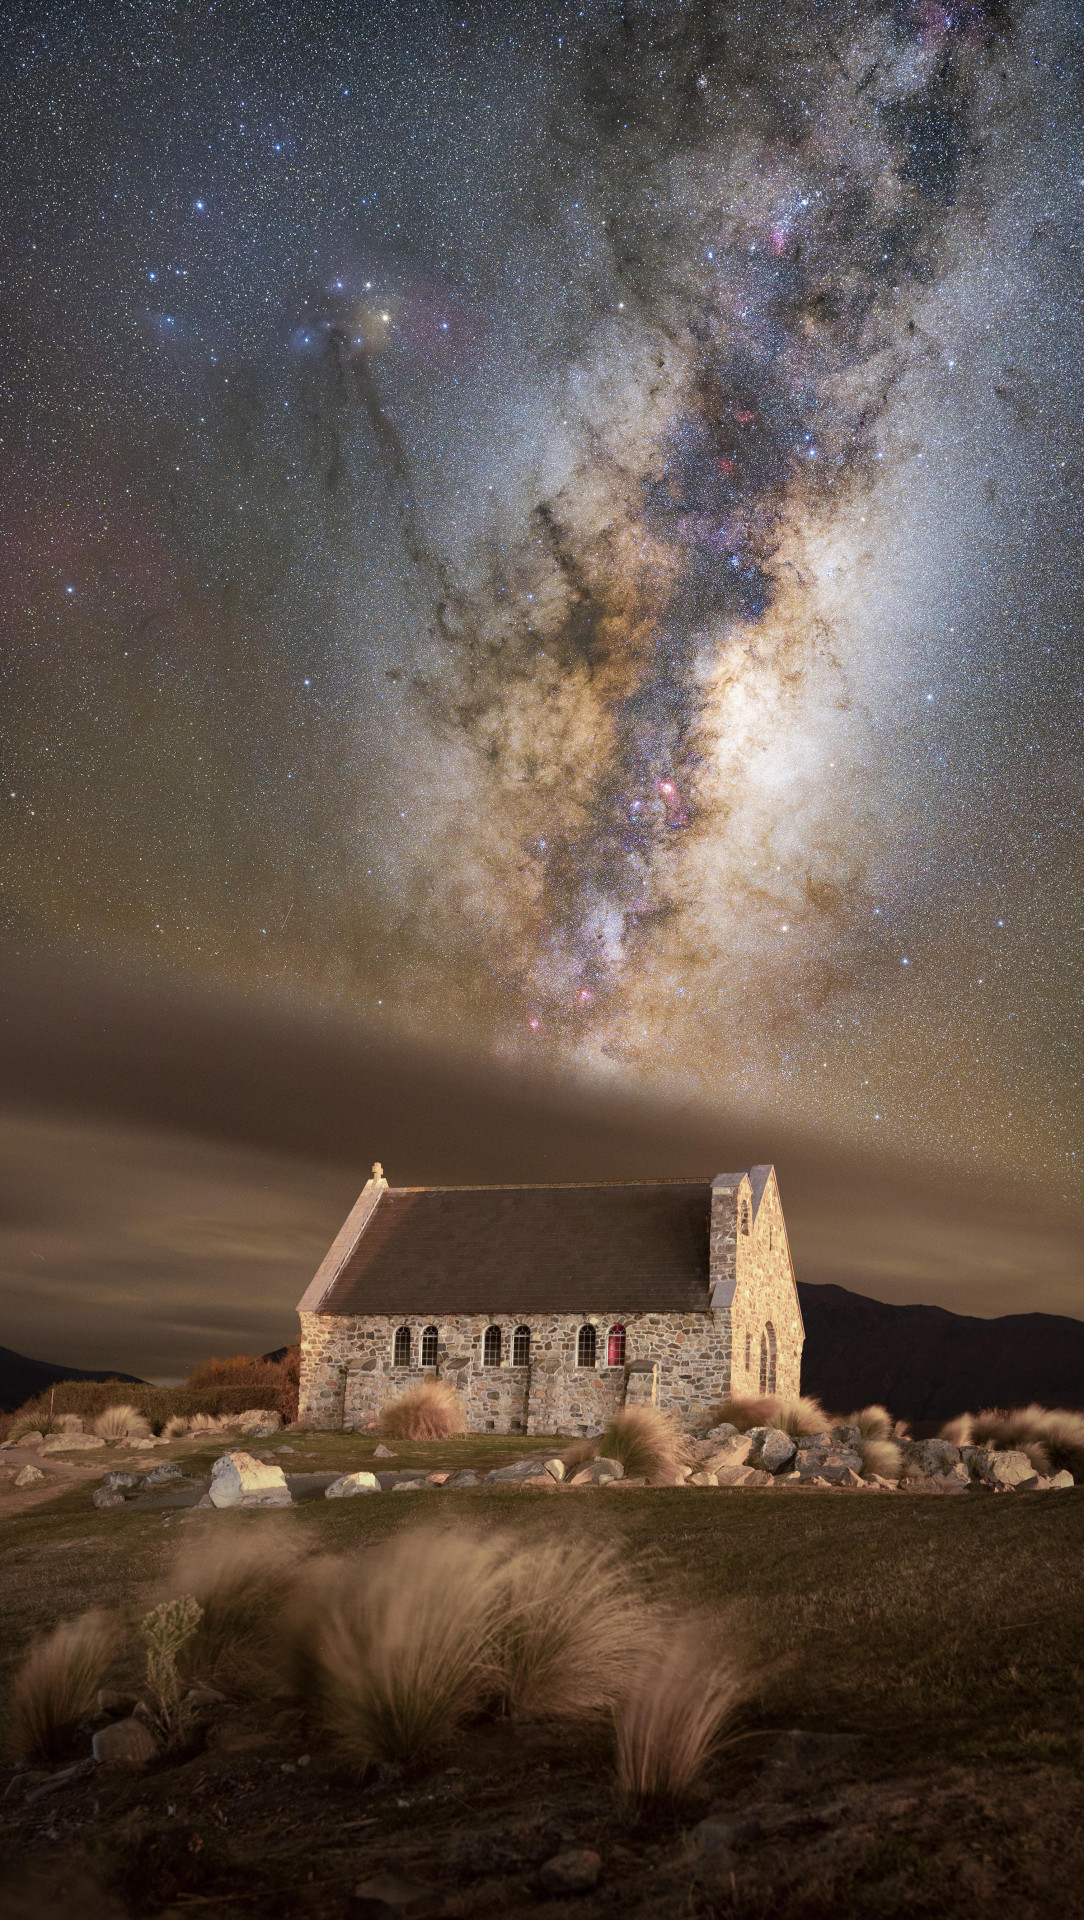 Milky Way over iconic New Zealand church